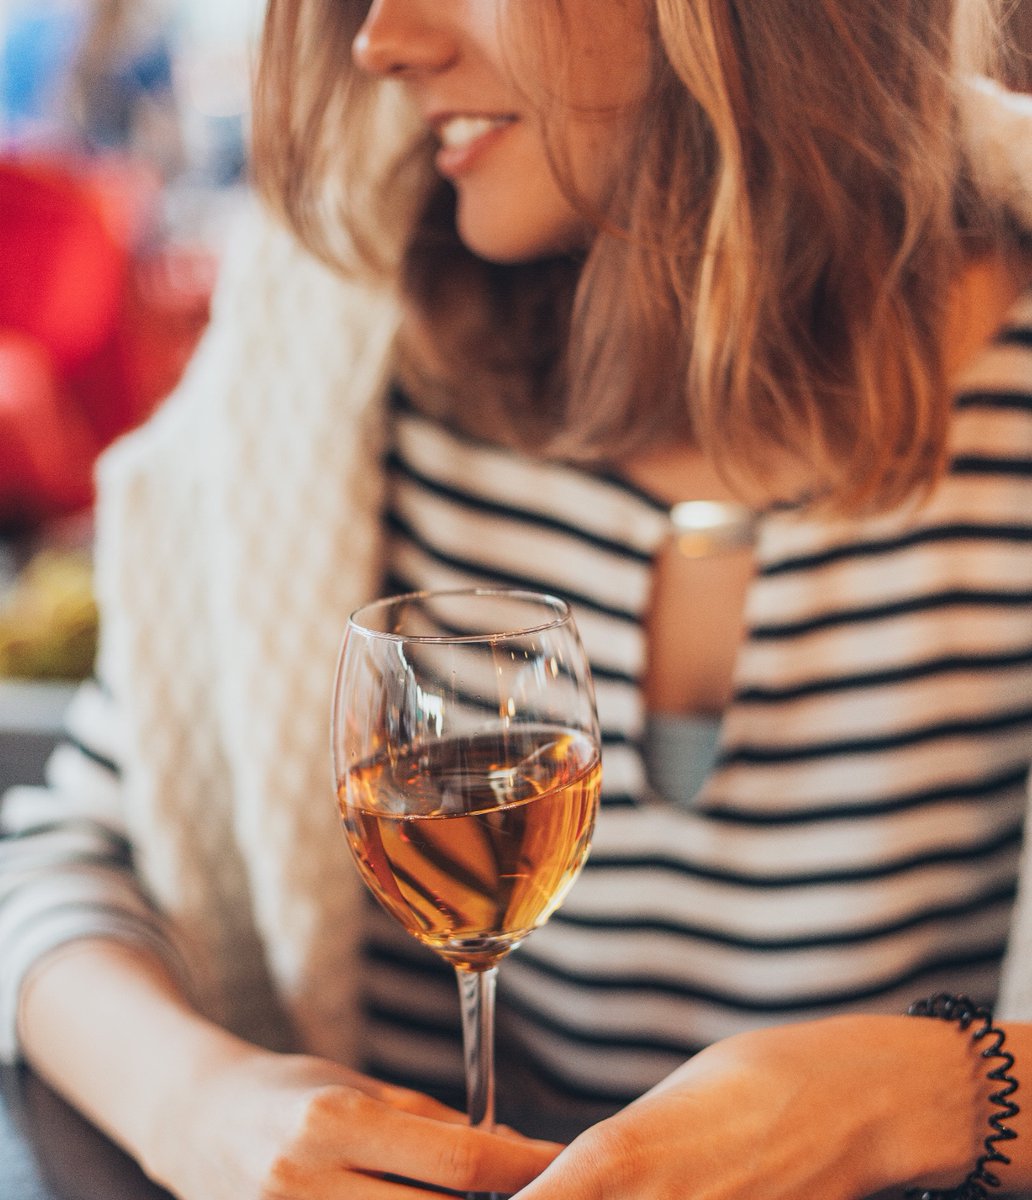 Does that new person drink too much? - by @DrPamSpurr blog.wingmanapp.com/does-that-new-… #wingman #wingmanweekly